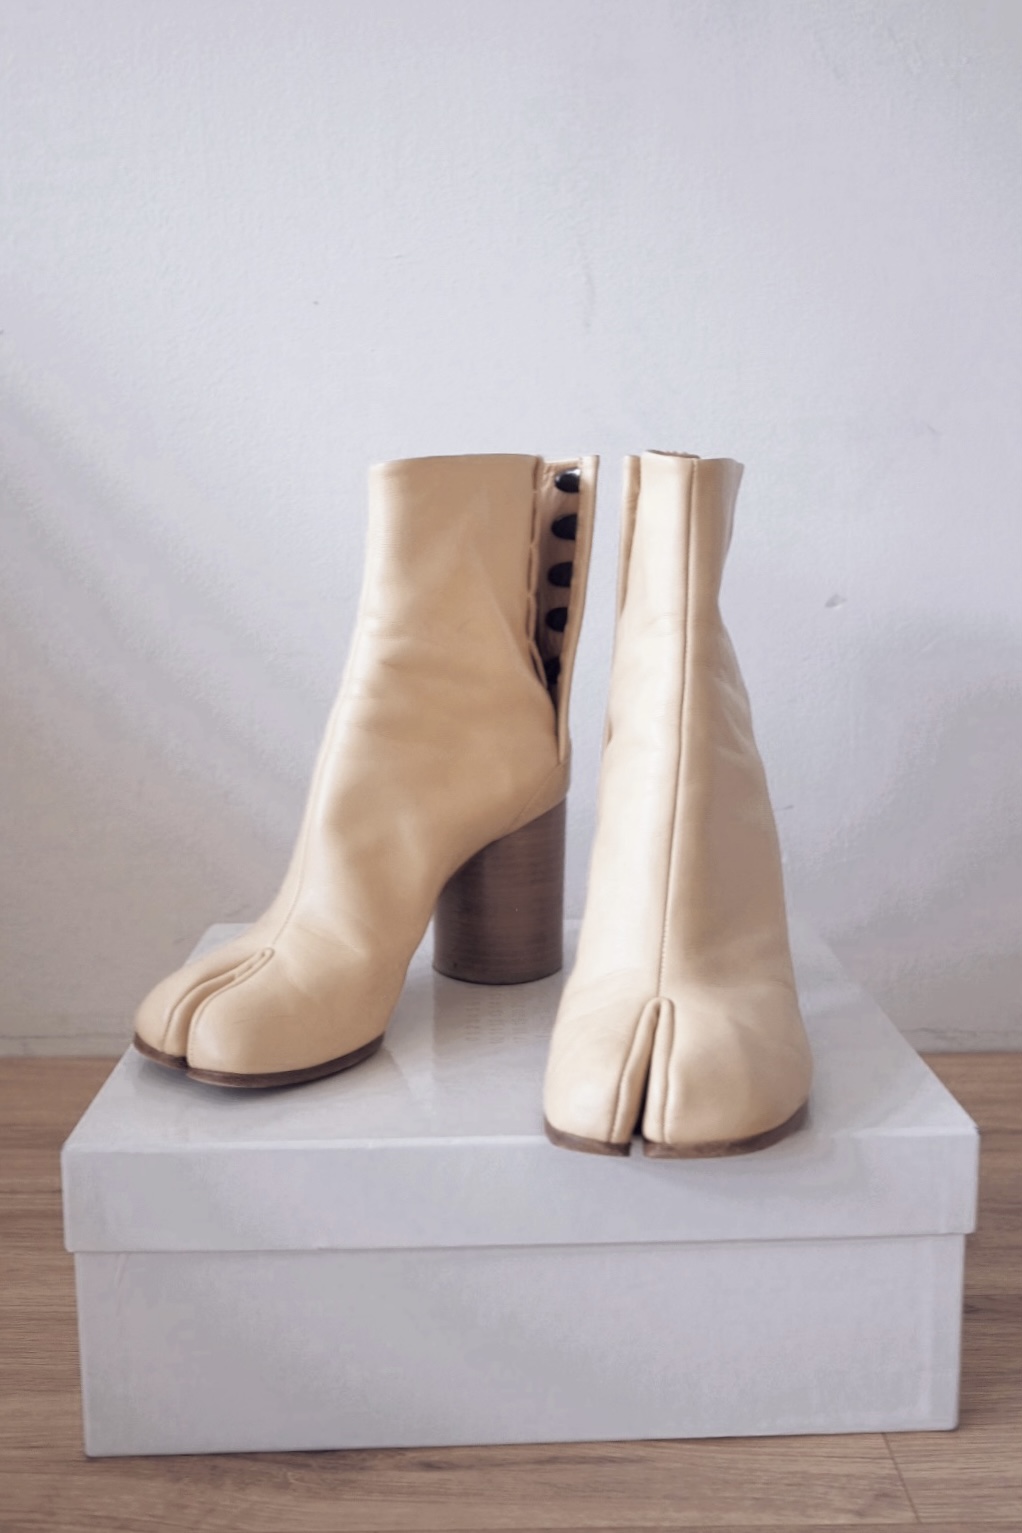 (one and only) Maison Margiela nude beige tabi boots, size 39